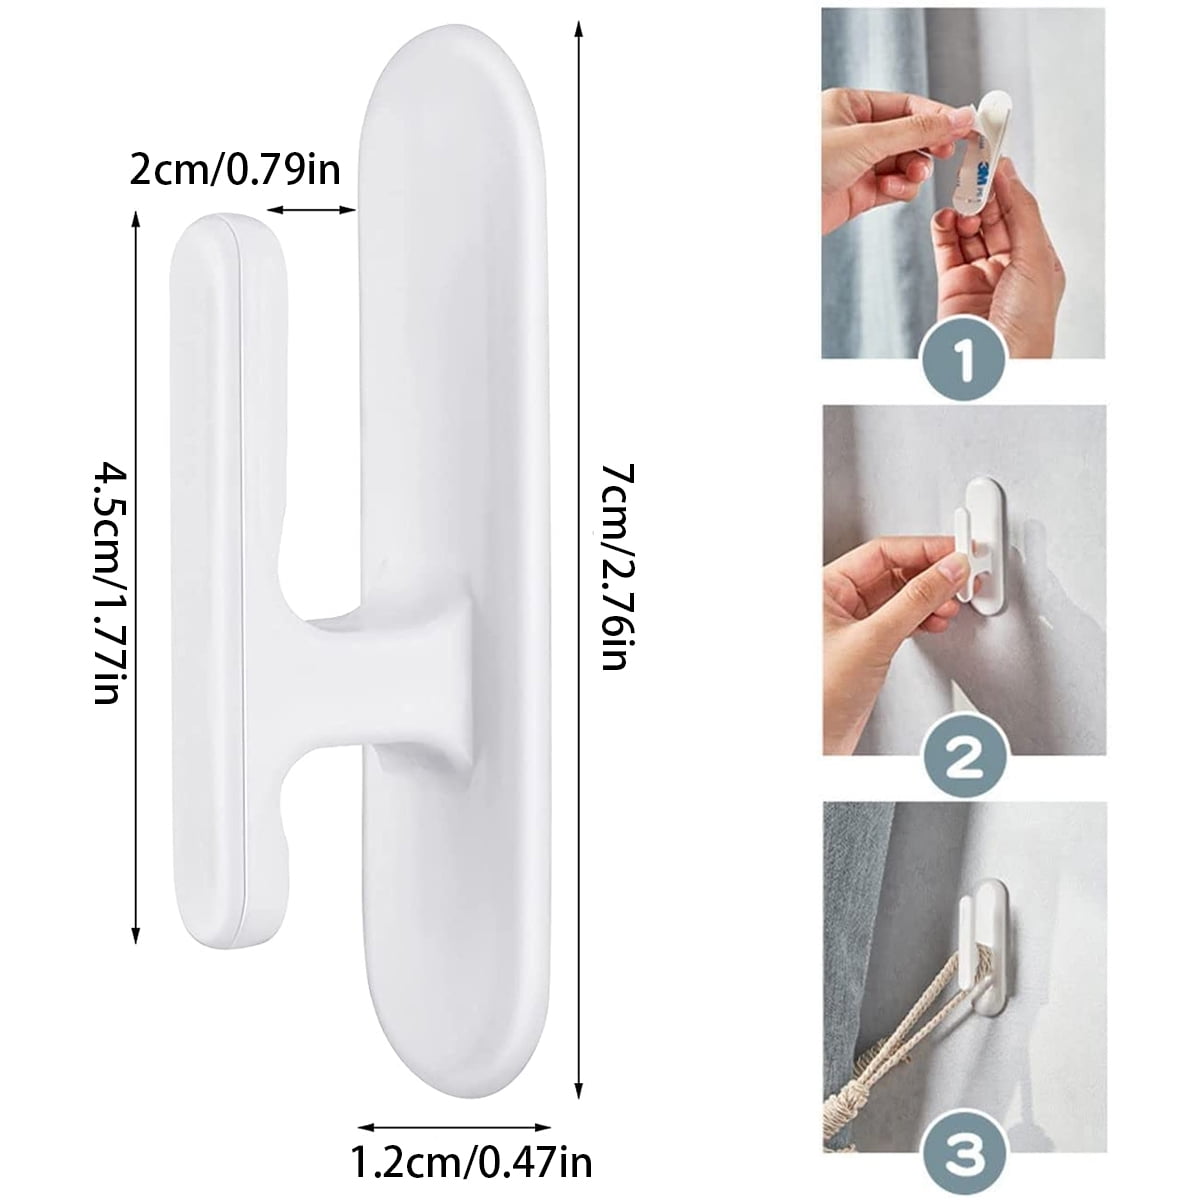 Grevosea 8 Pieces Blind Cord Winding Safety Blind Cord Hooks Blind Cord  Holder Adhesive Wall Hook Wrap Cleats Baby Proofing for Home Office Window